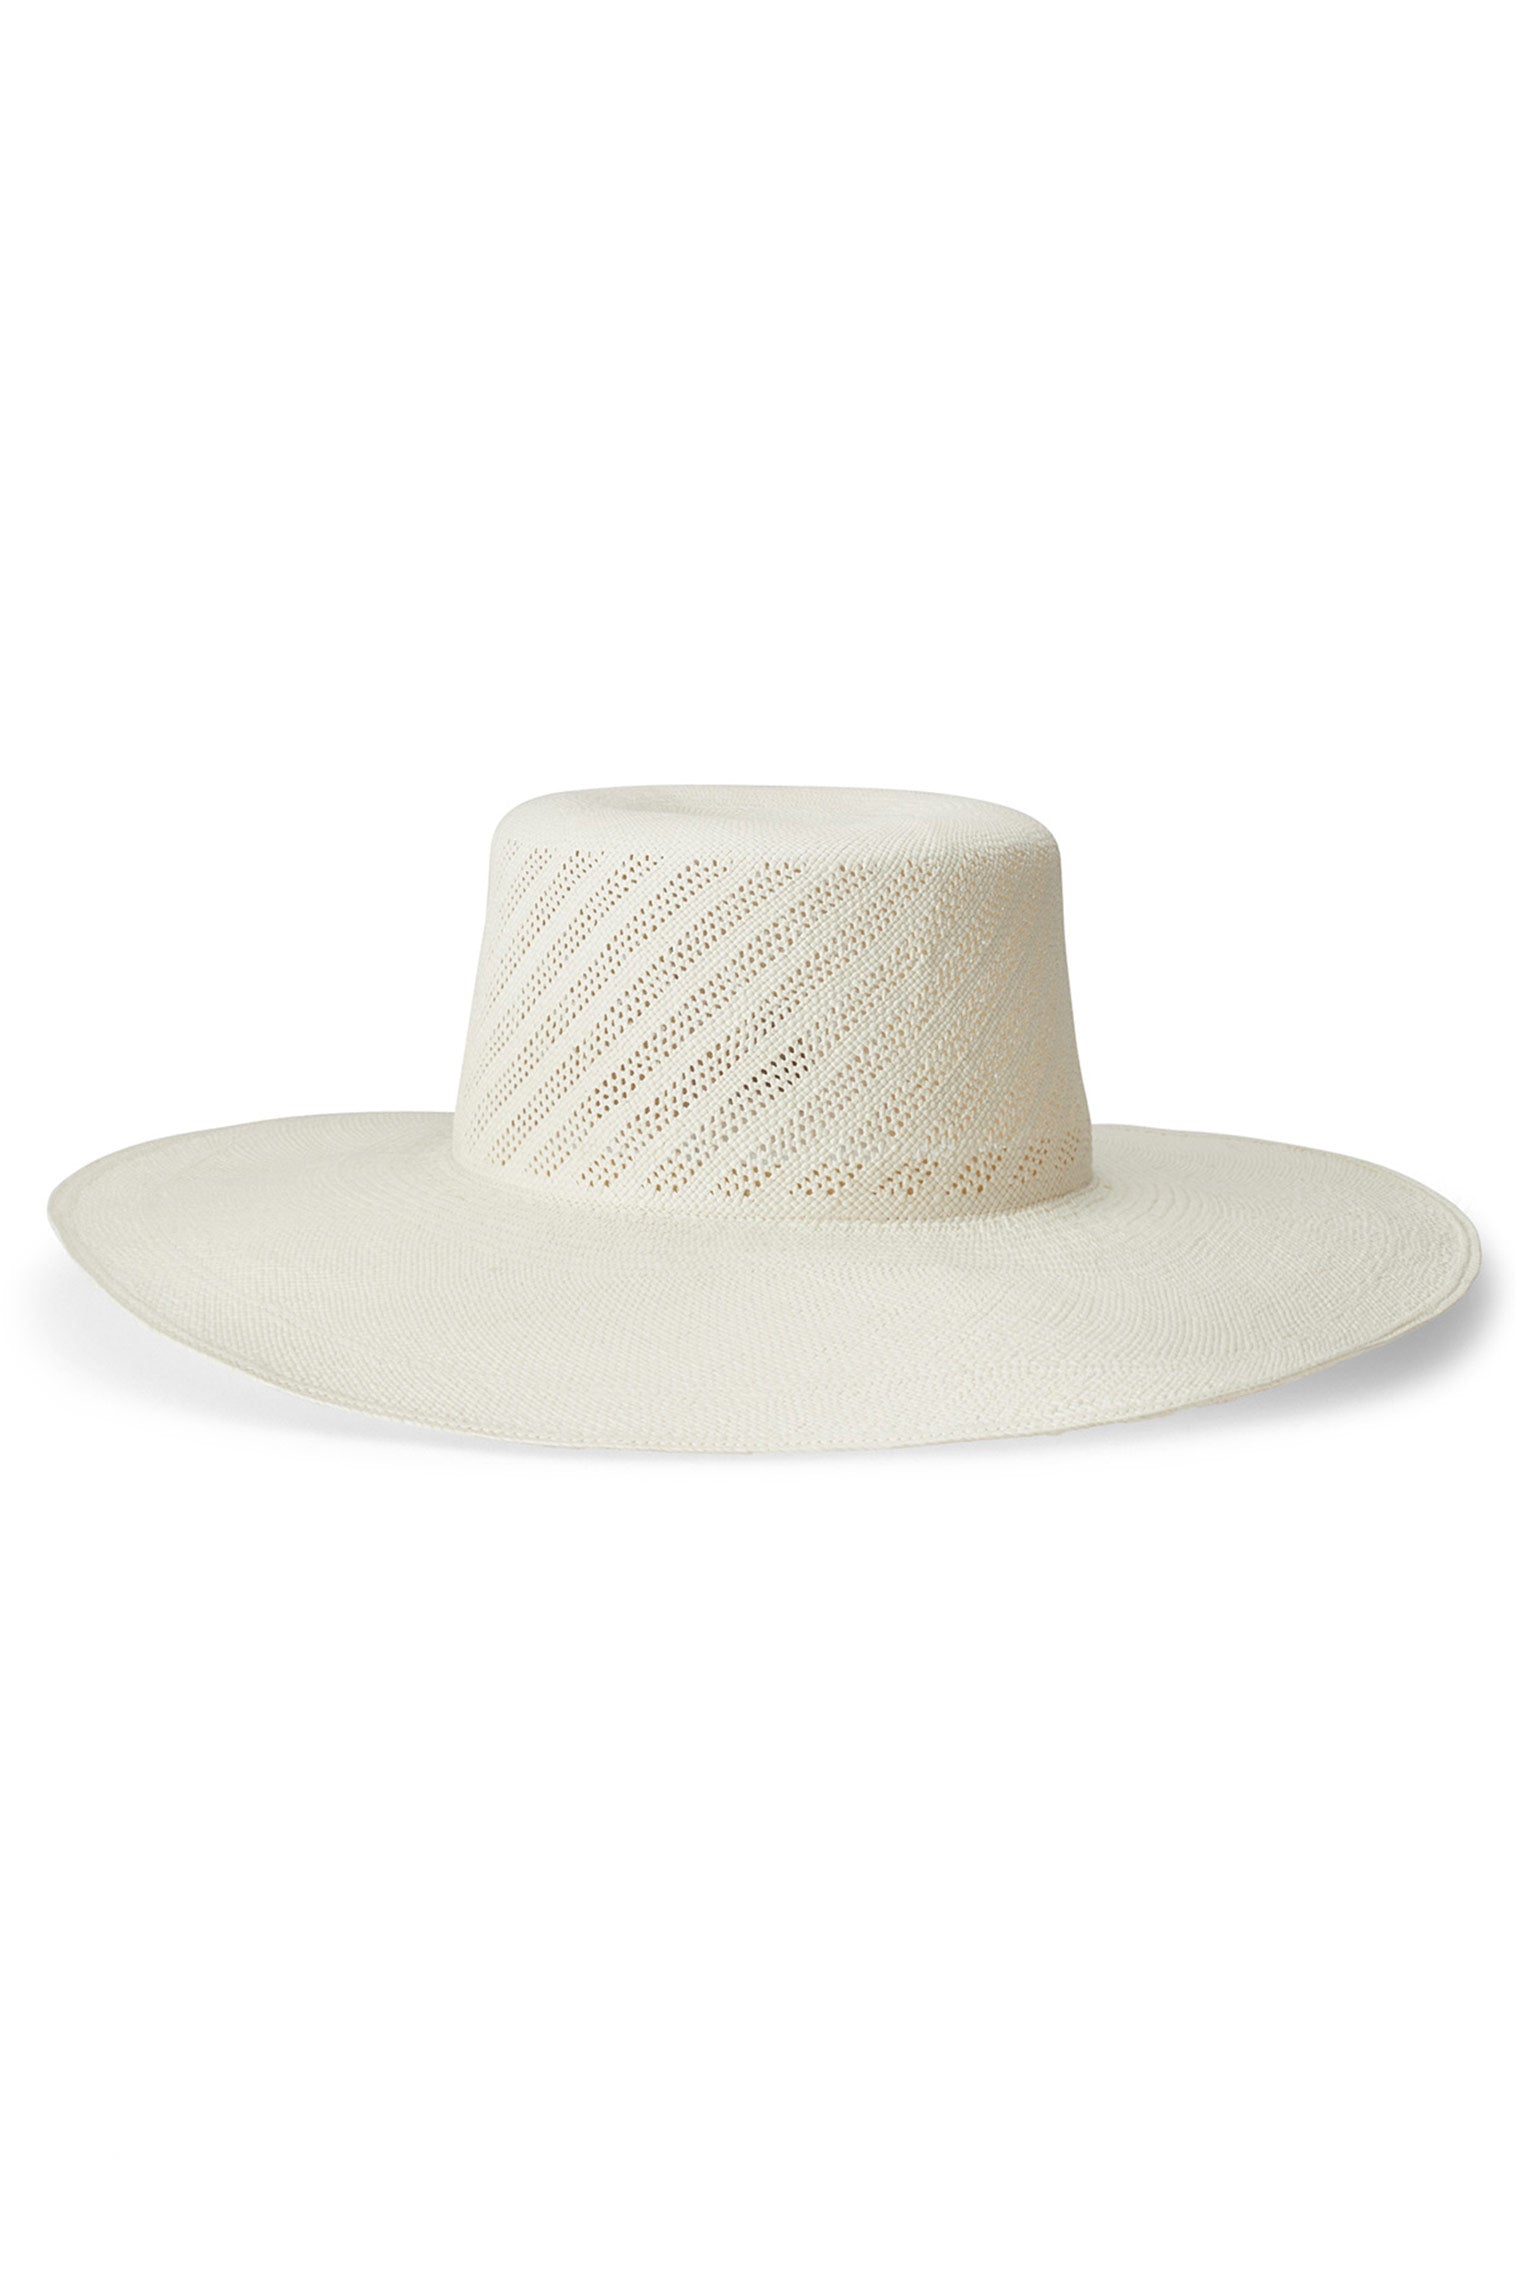 Women's Packable and Rollable Hats - Lock & Co. Hatters